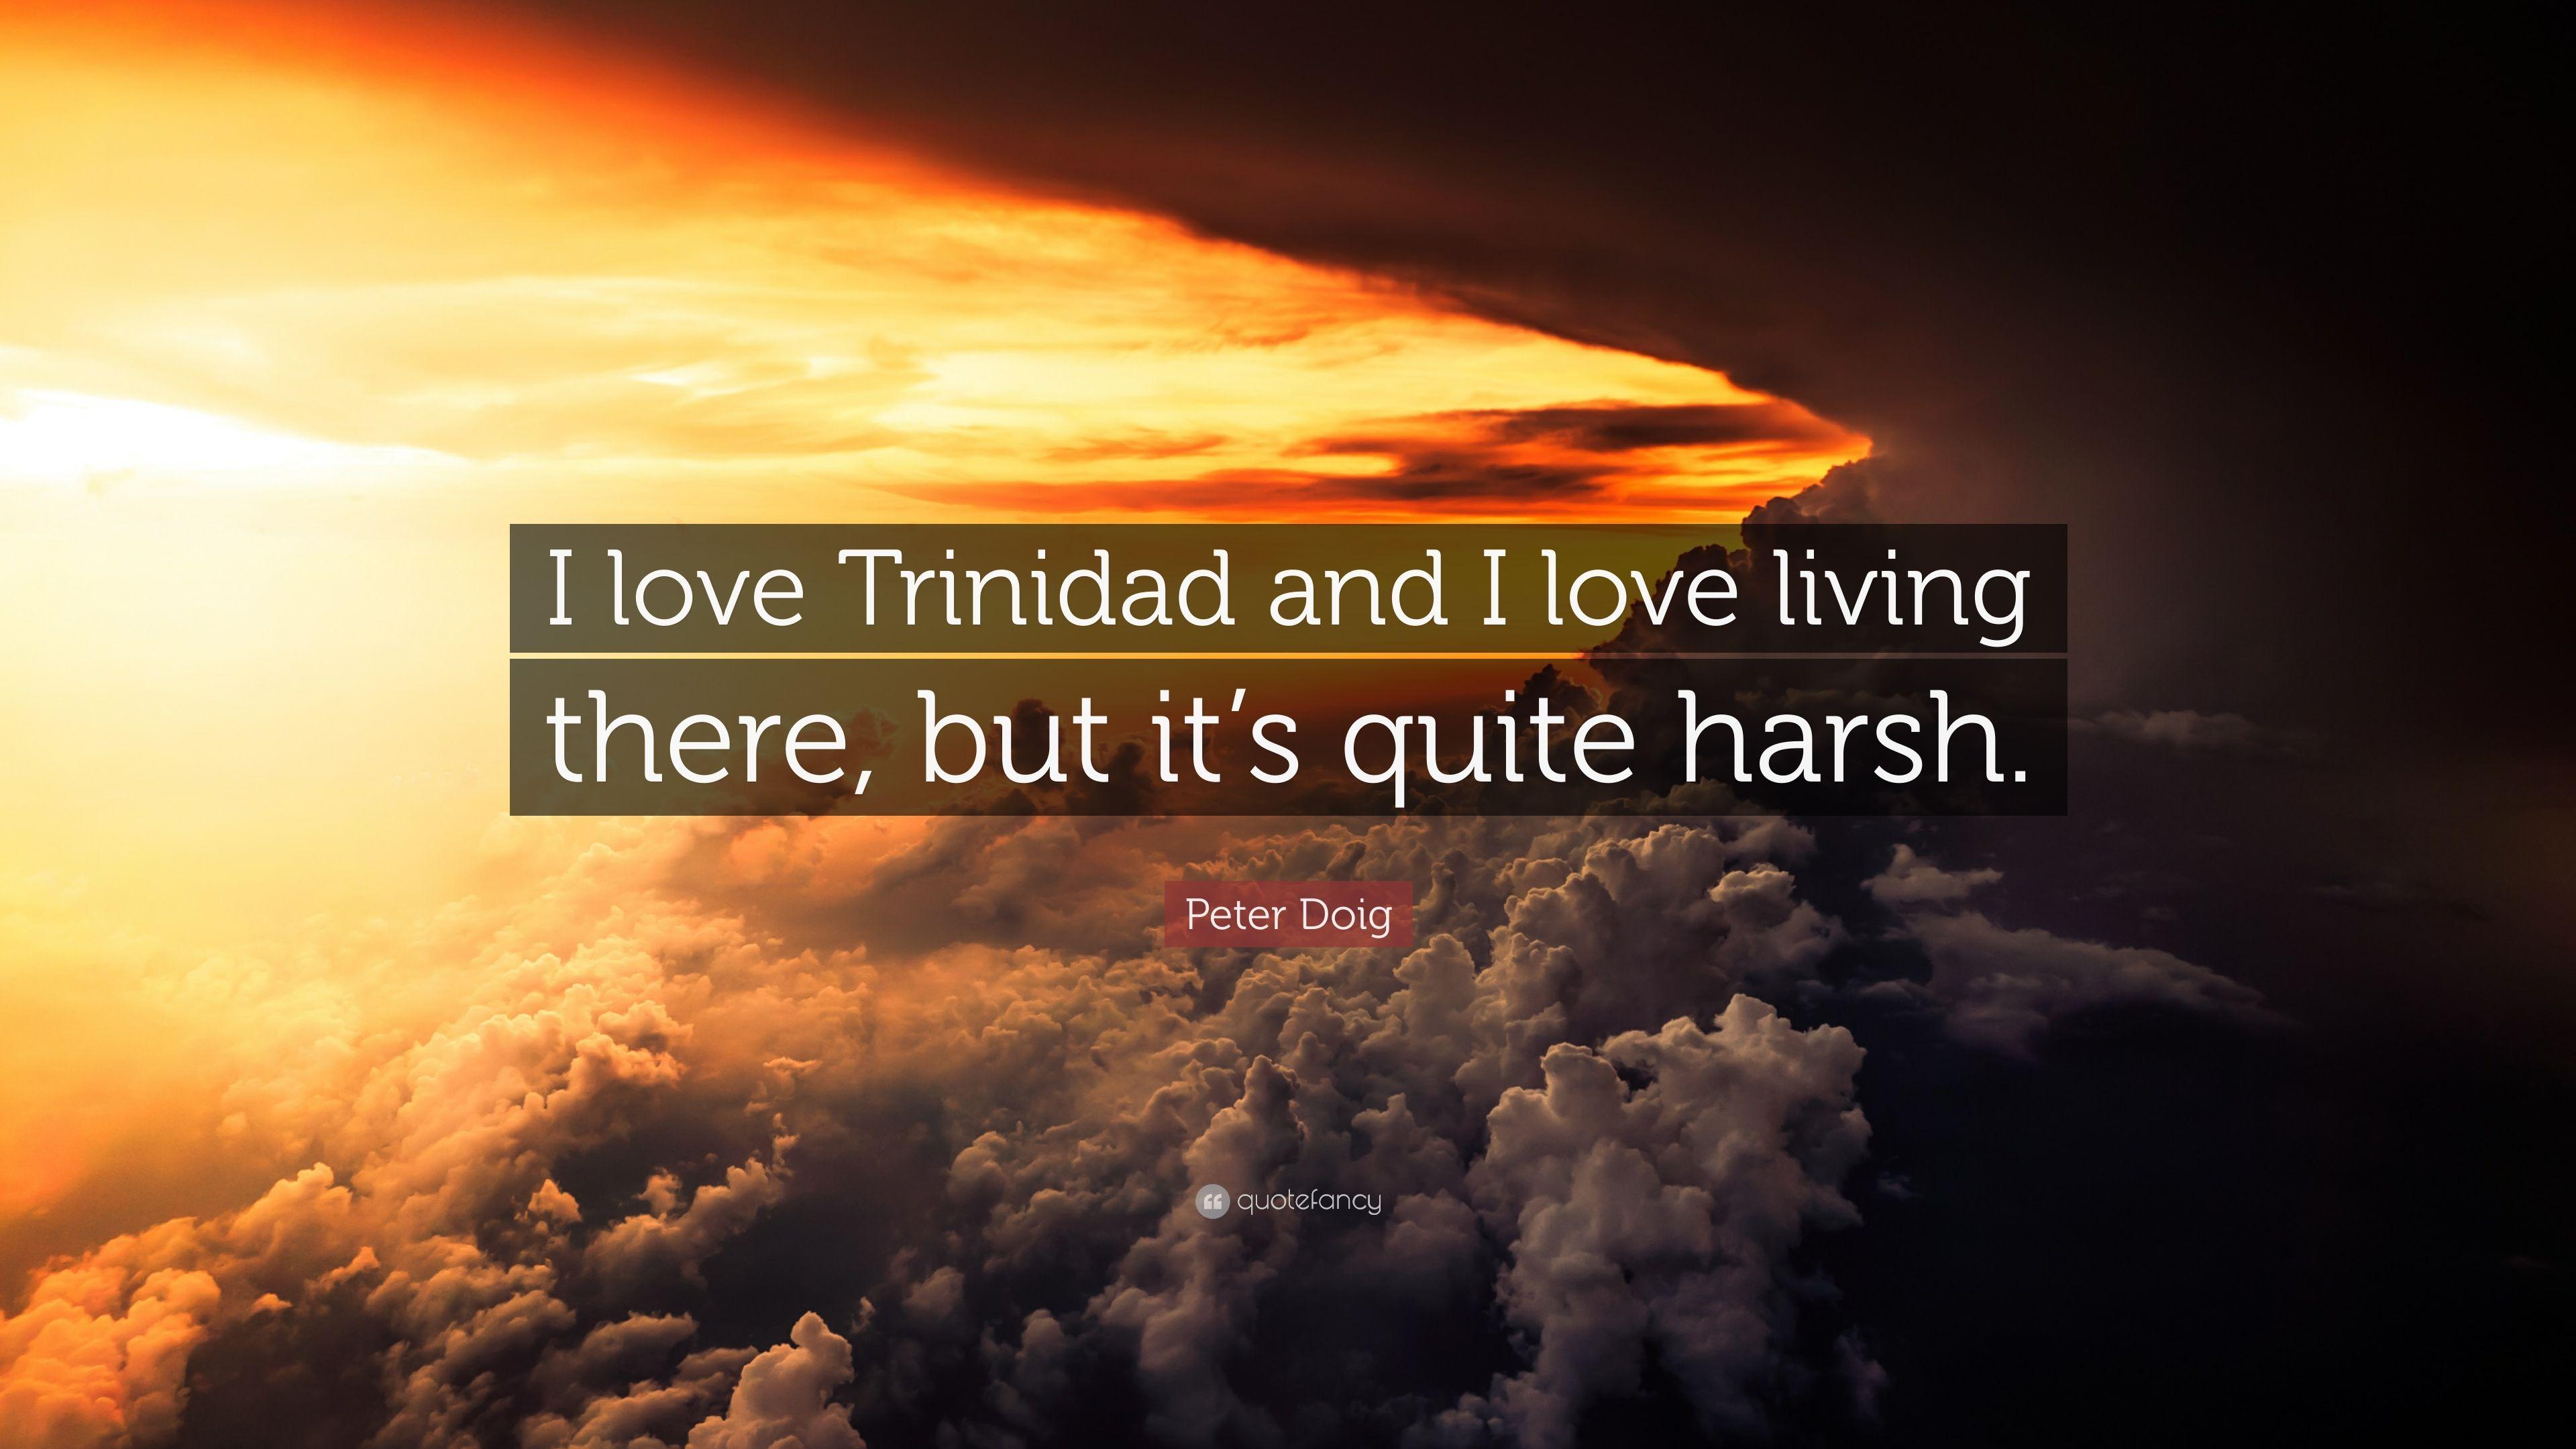 Peter Doig Quote: “I love Trinidad and I love living there, but it's